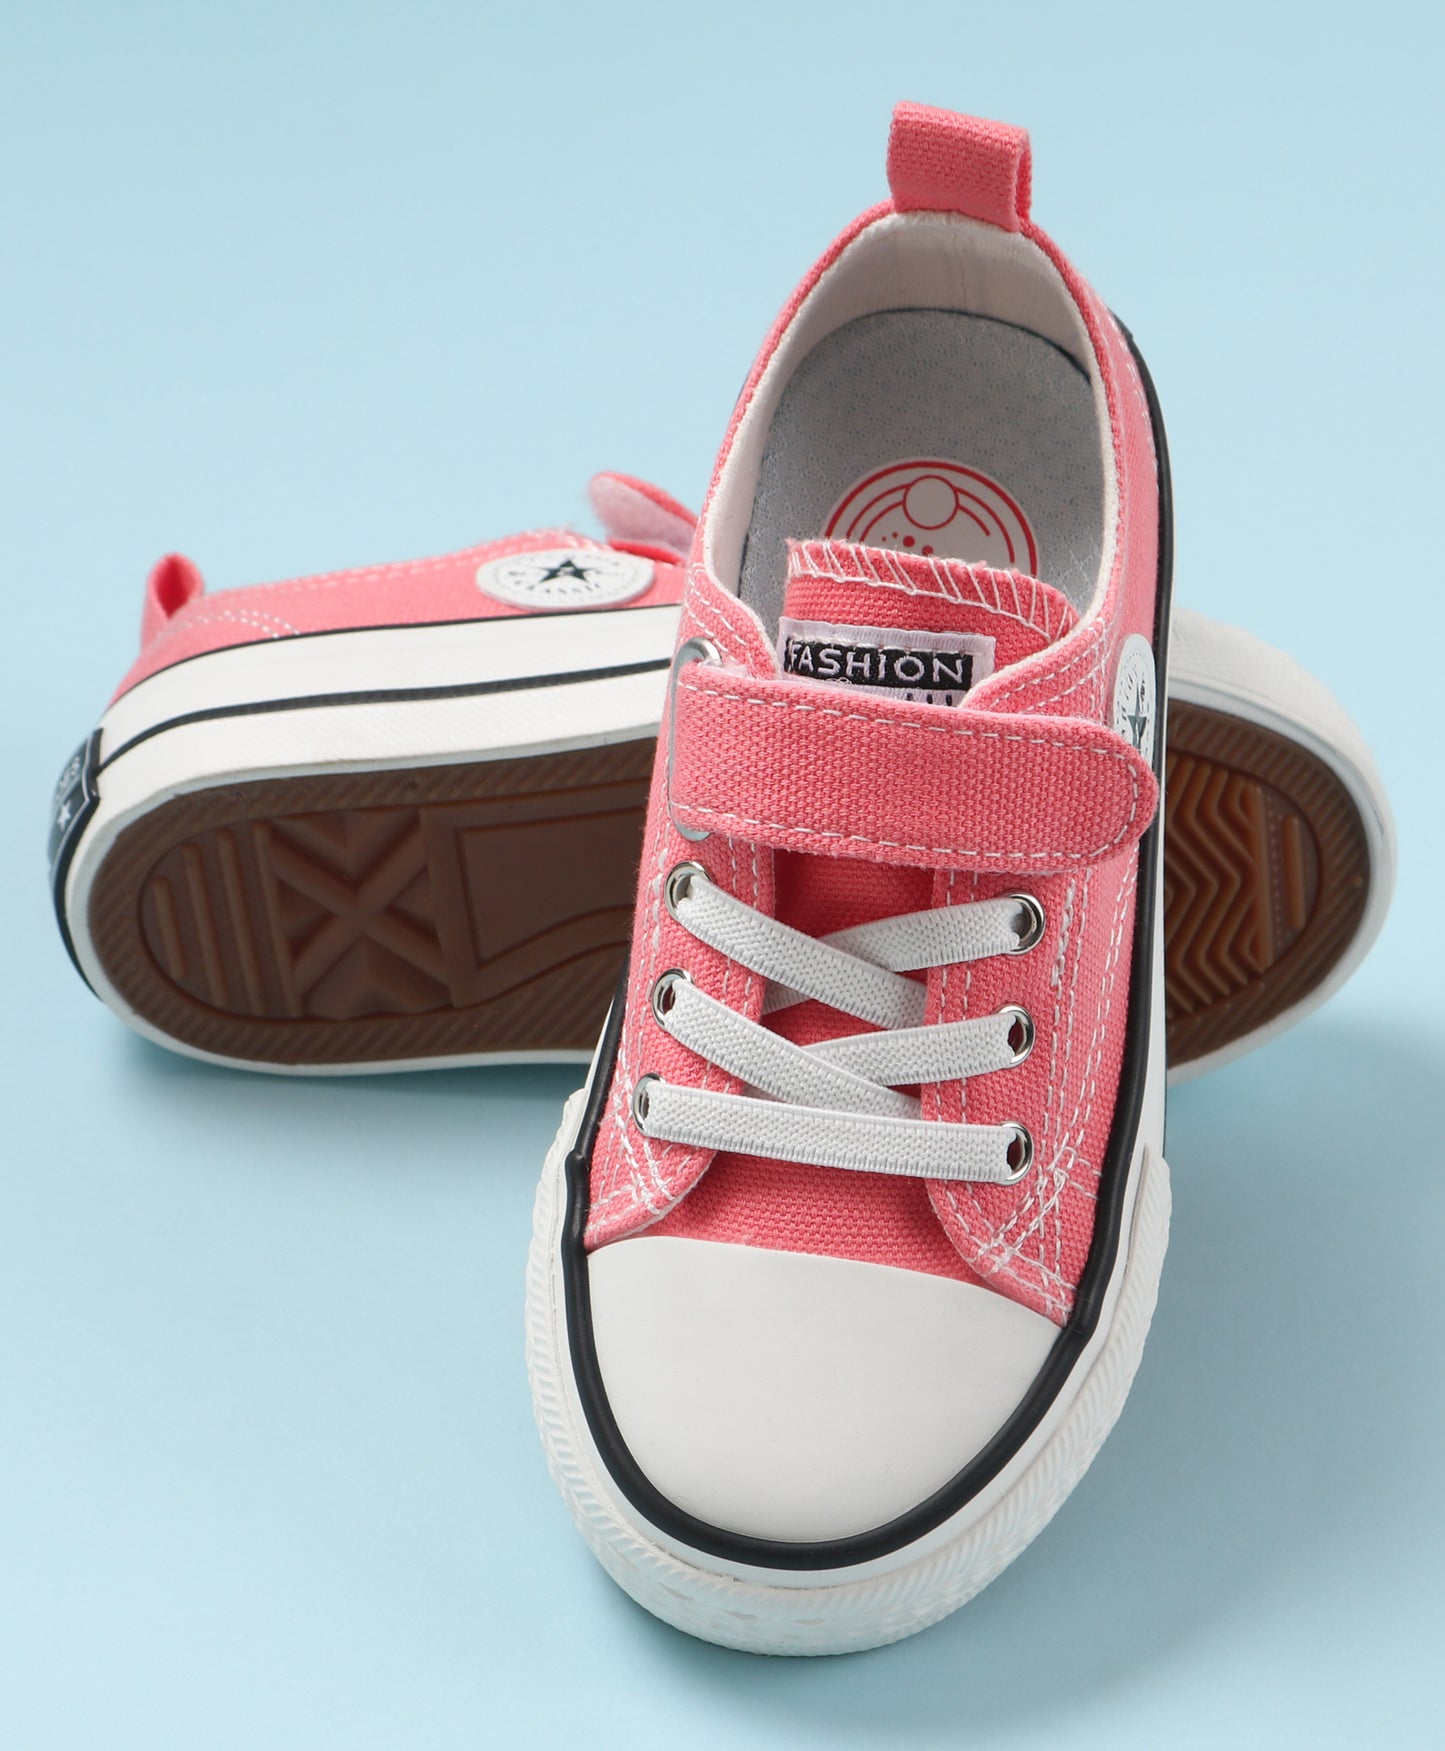 STAR PATCH VELCRO CLOSURE SNEAKERS - PINK